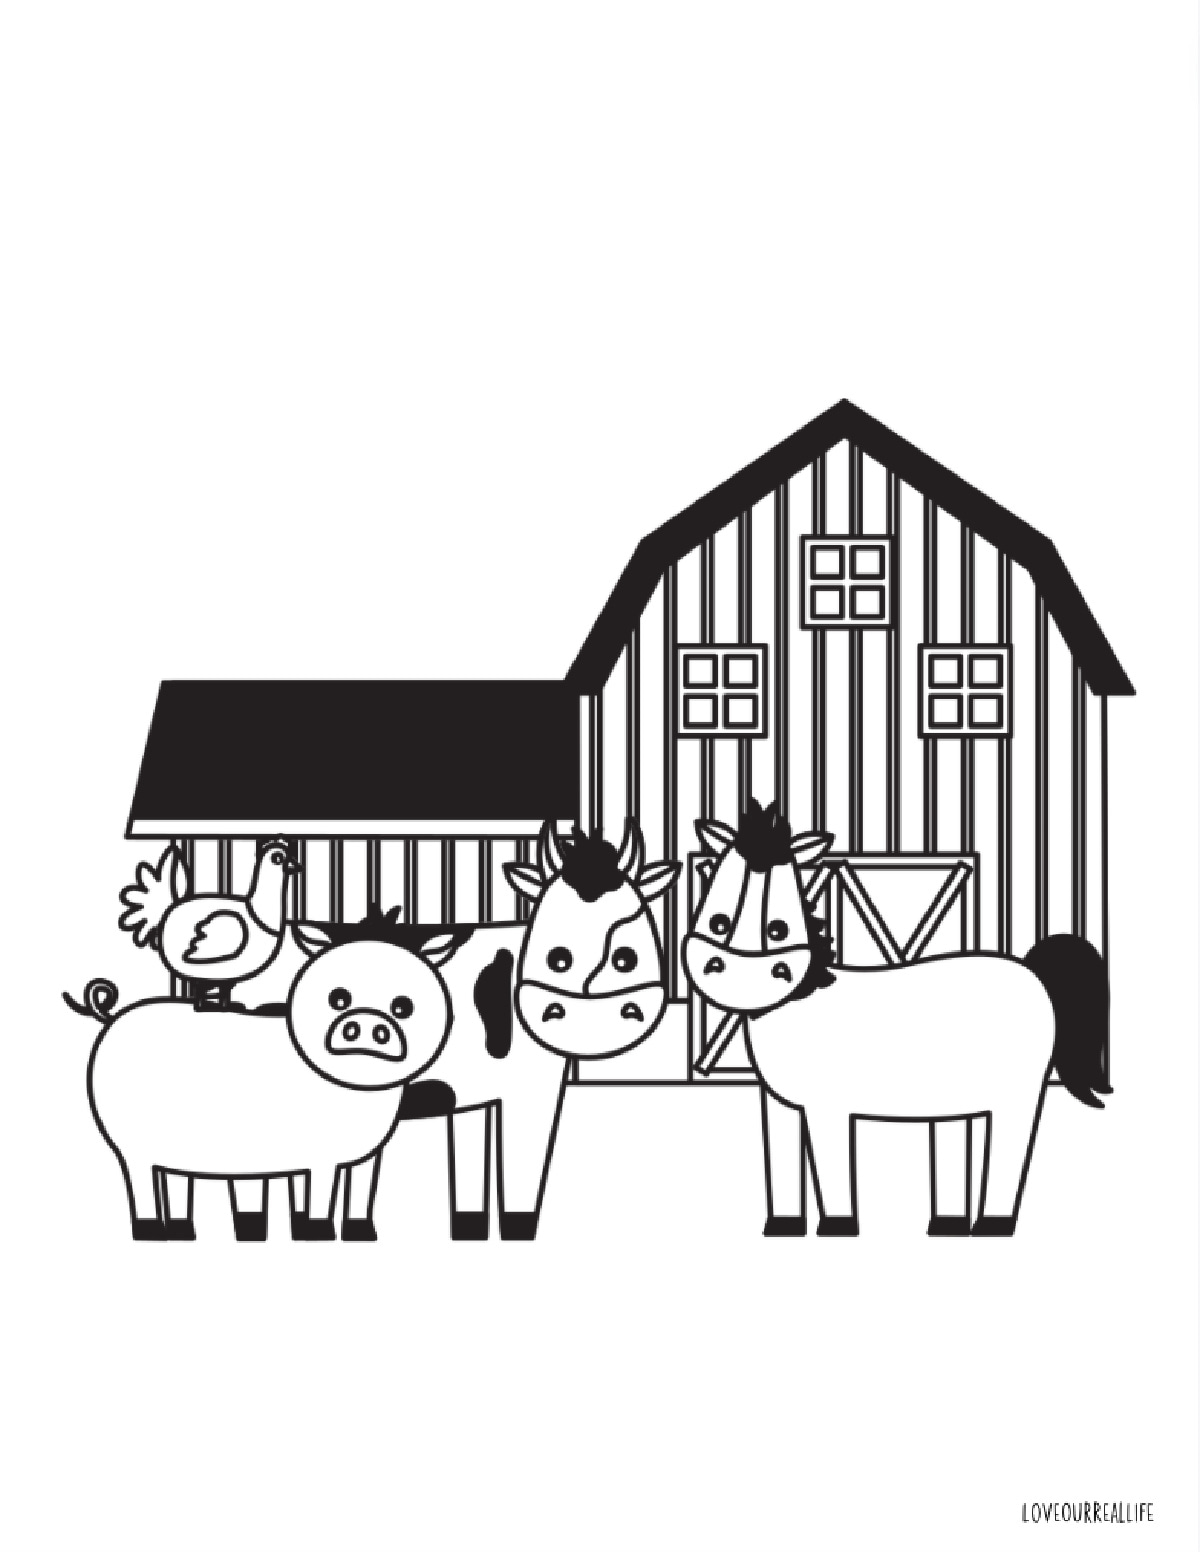 Coloring page farm barn and animals.